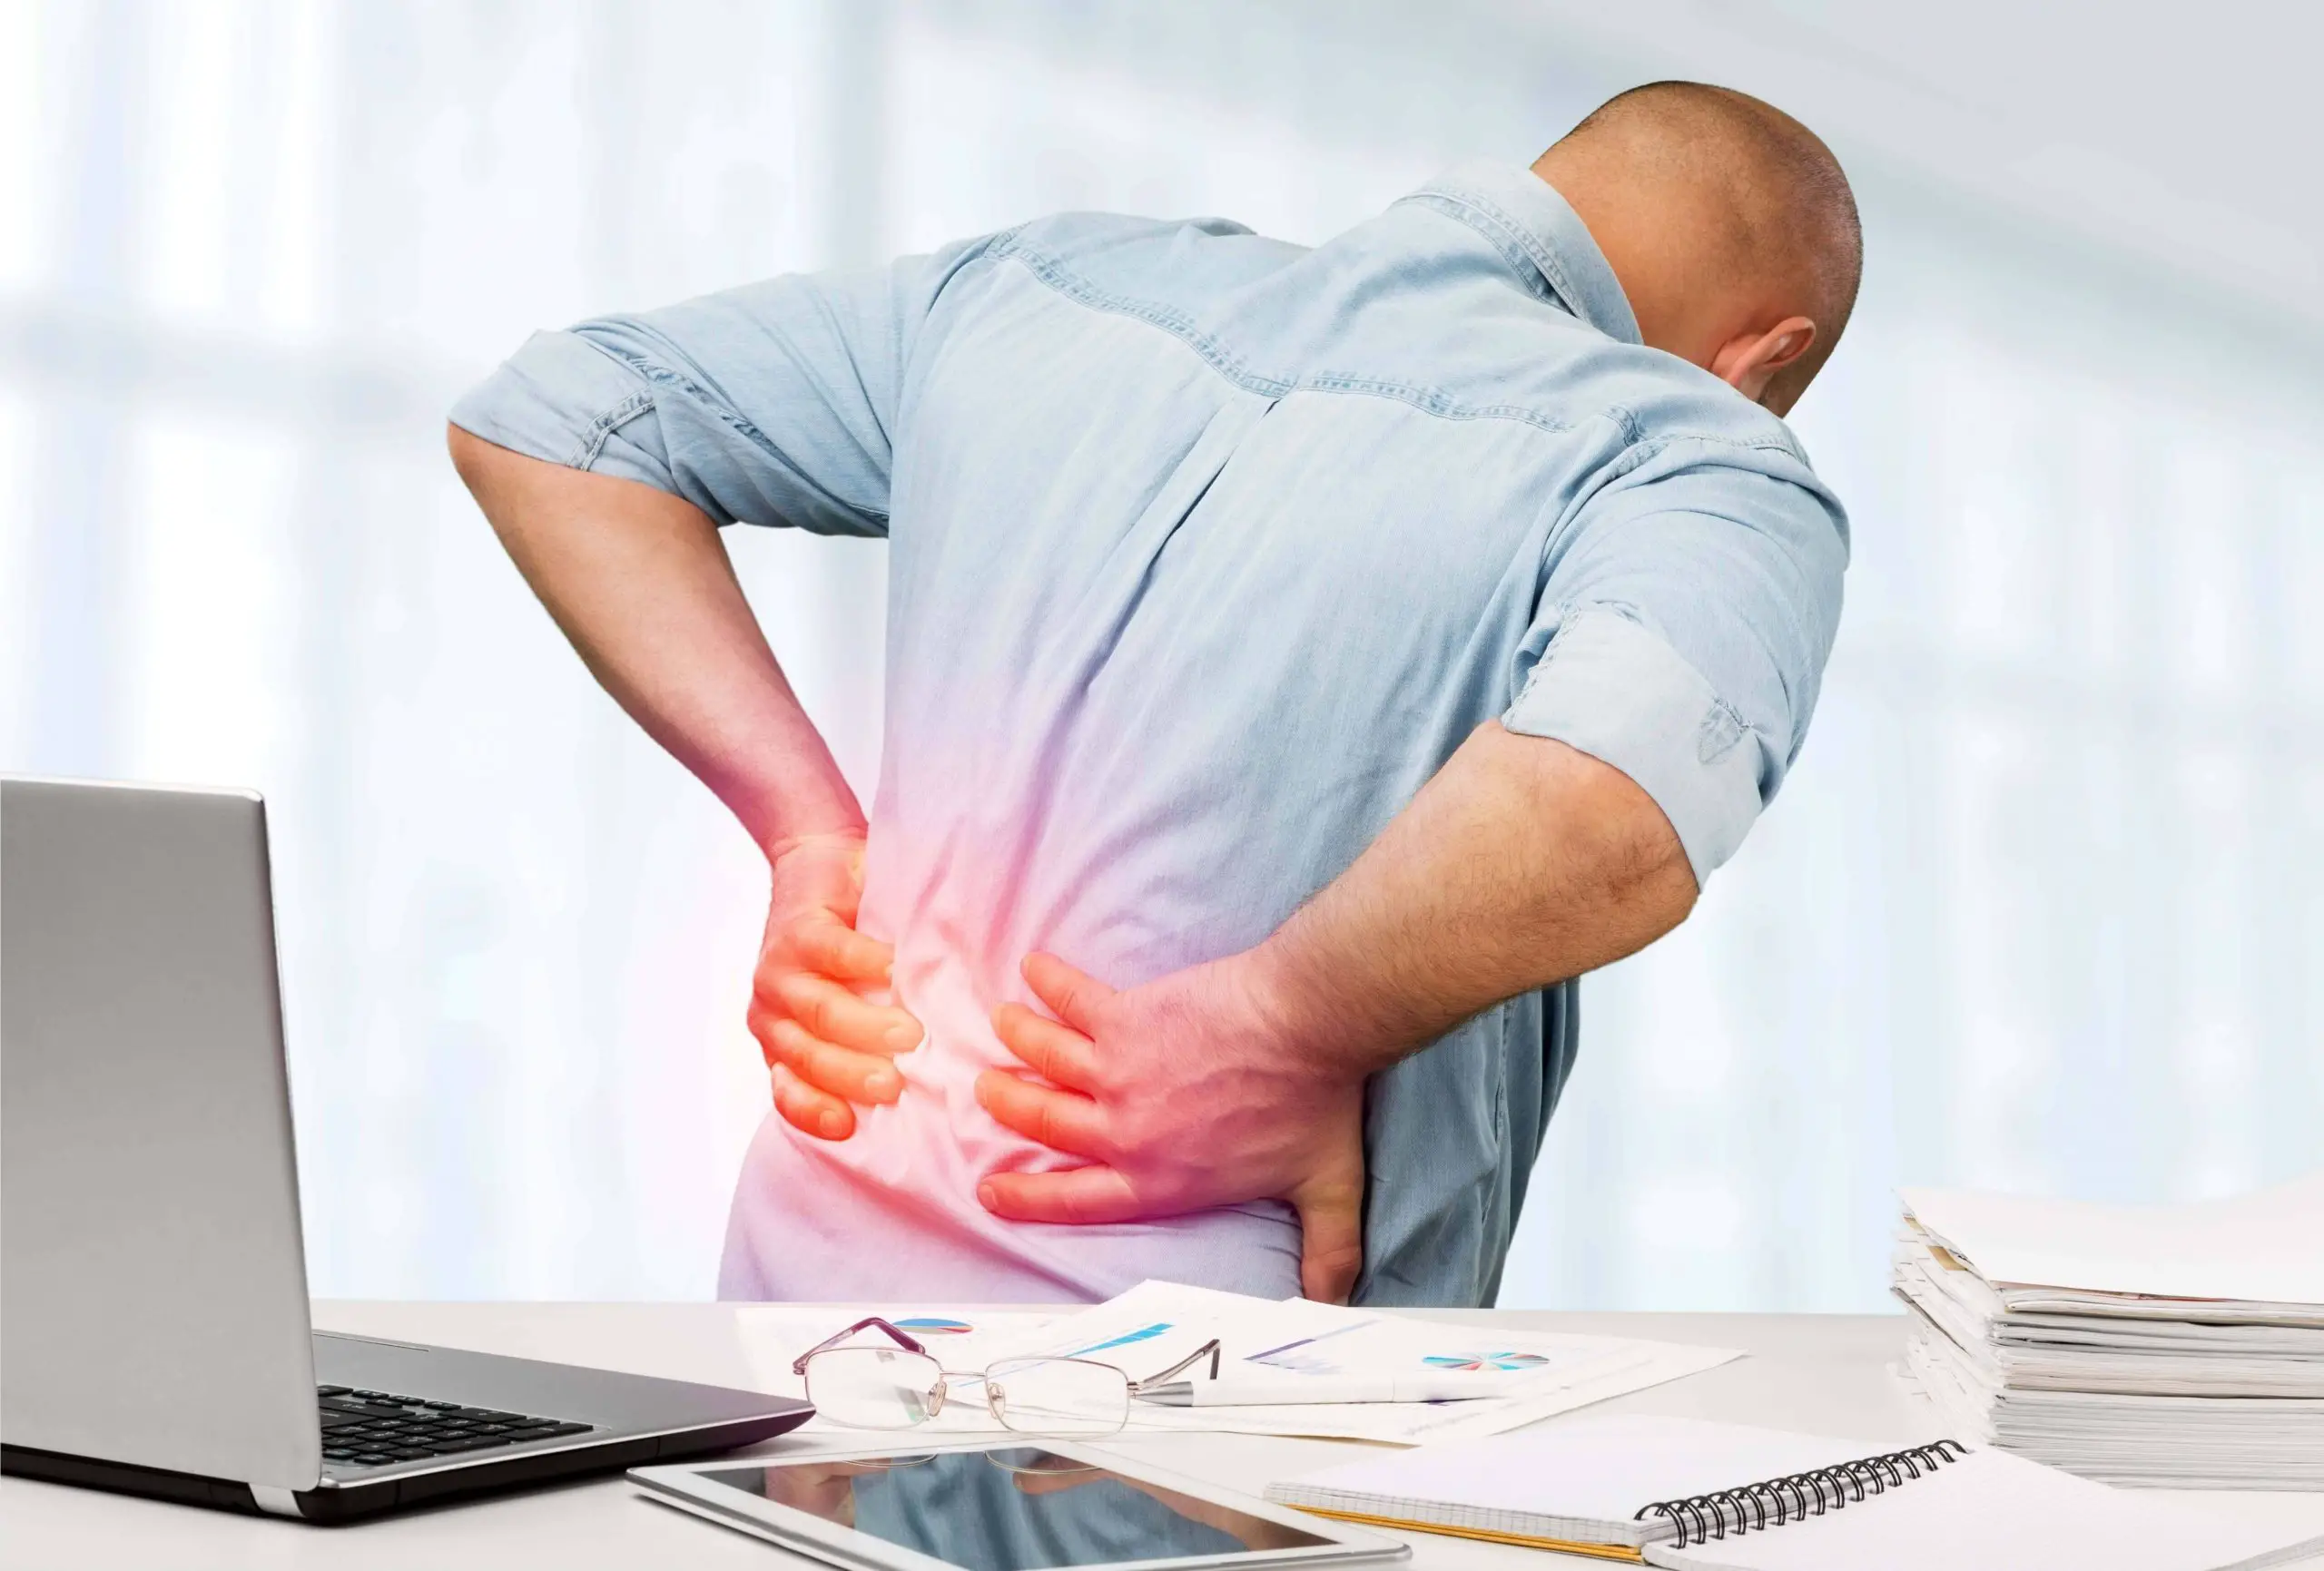 What do you think is causing your back pain? Could it be a ...